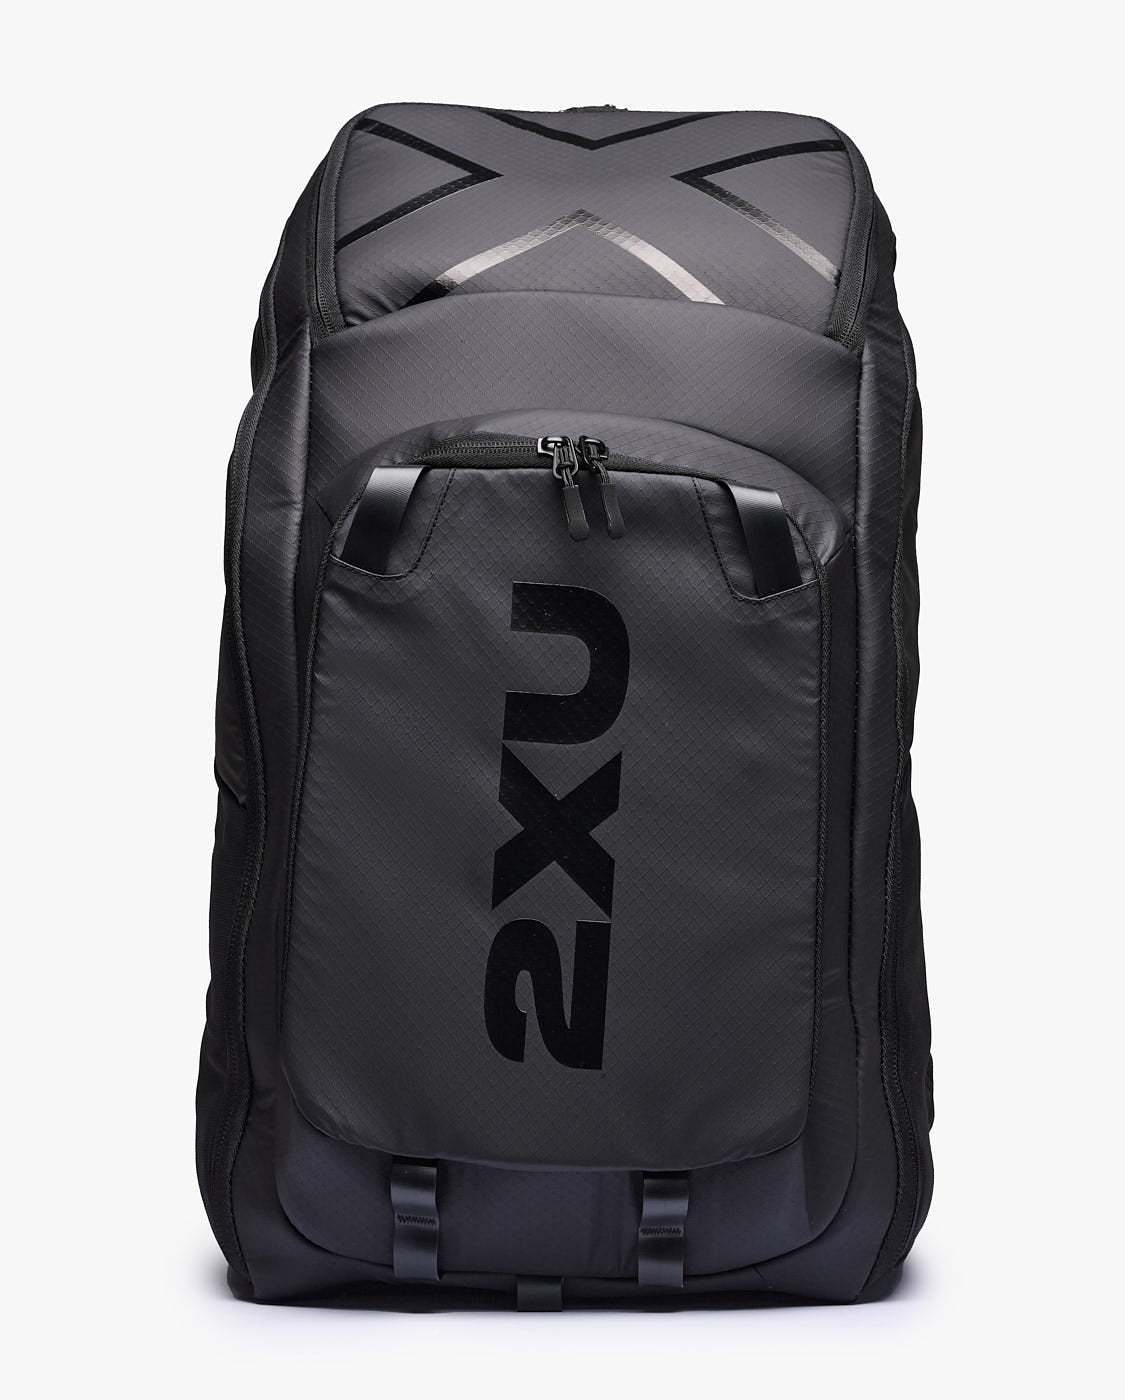 Fru coping Udled Transition Backpack – 2XU